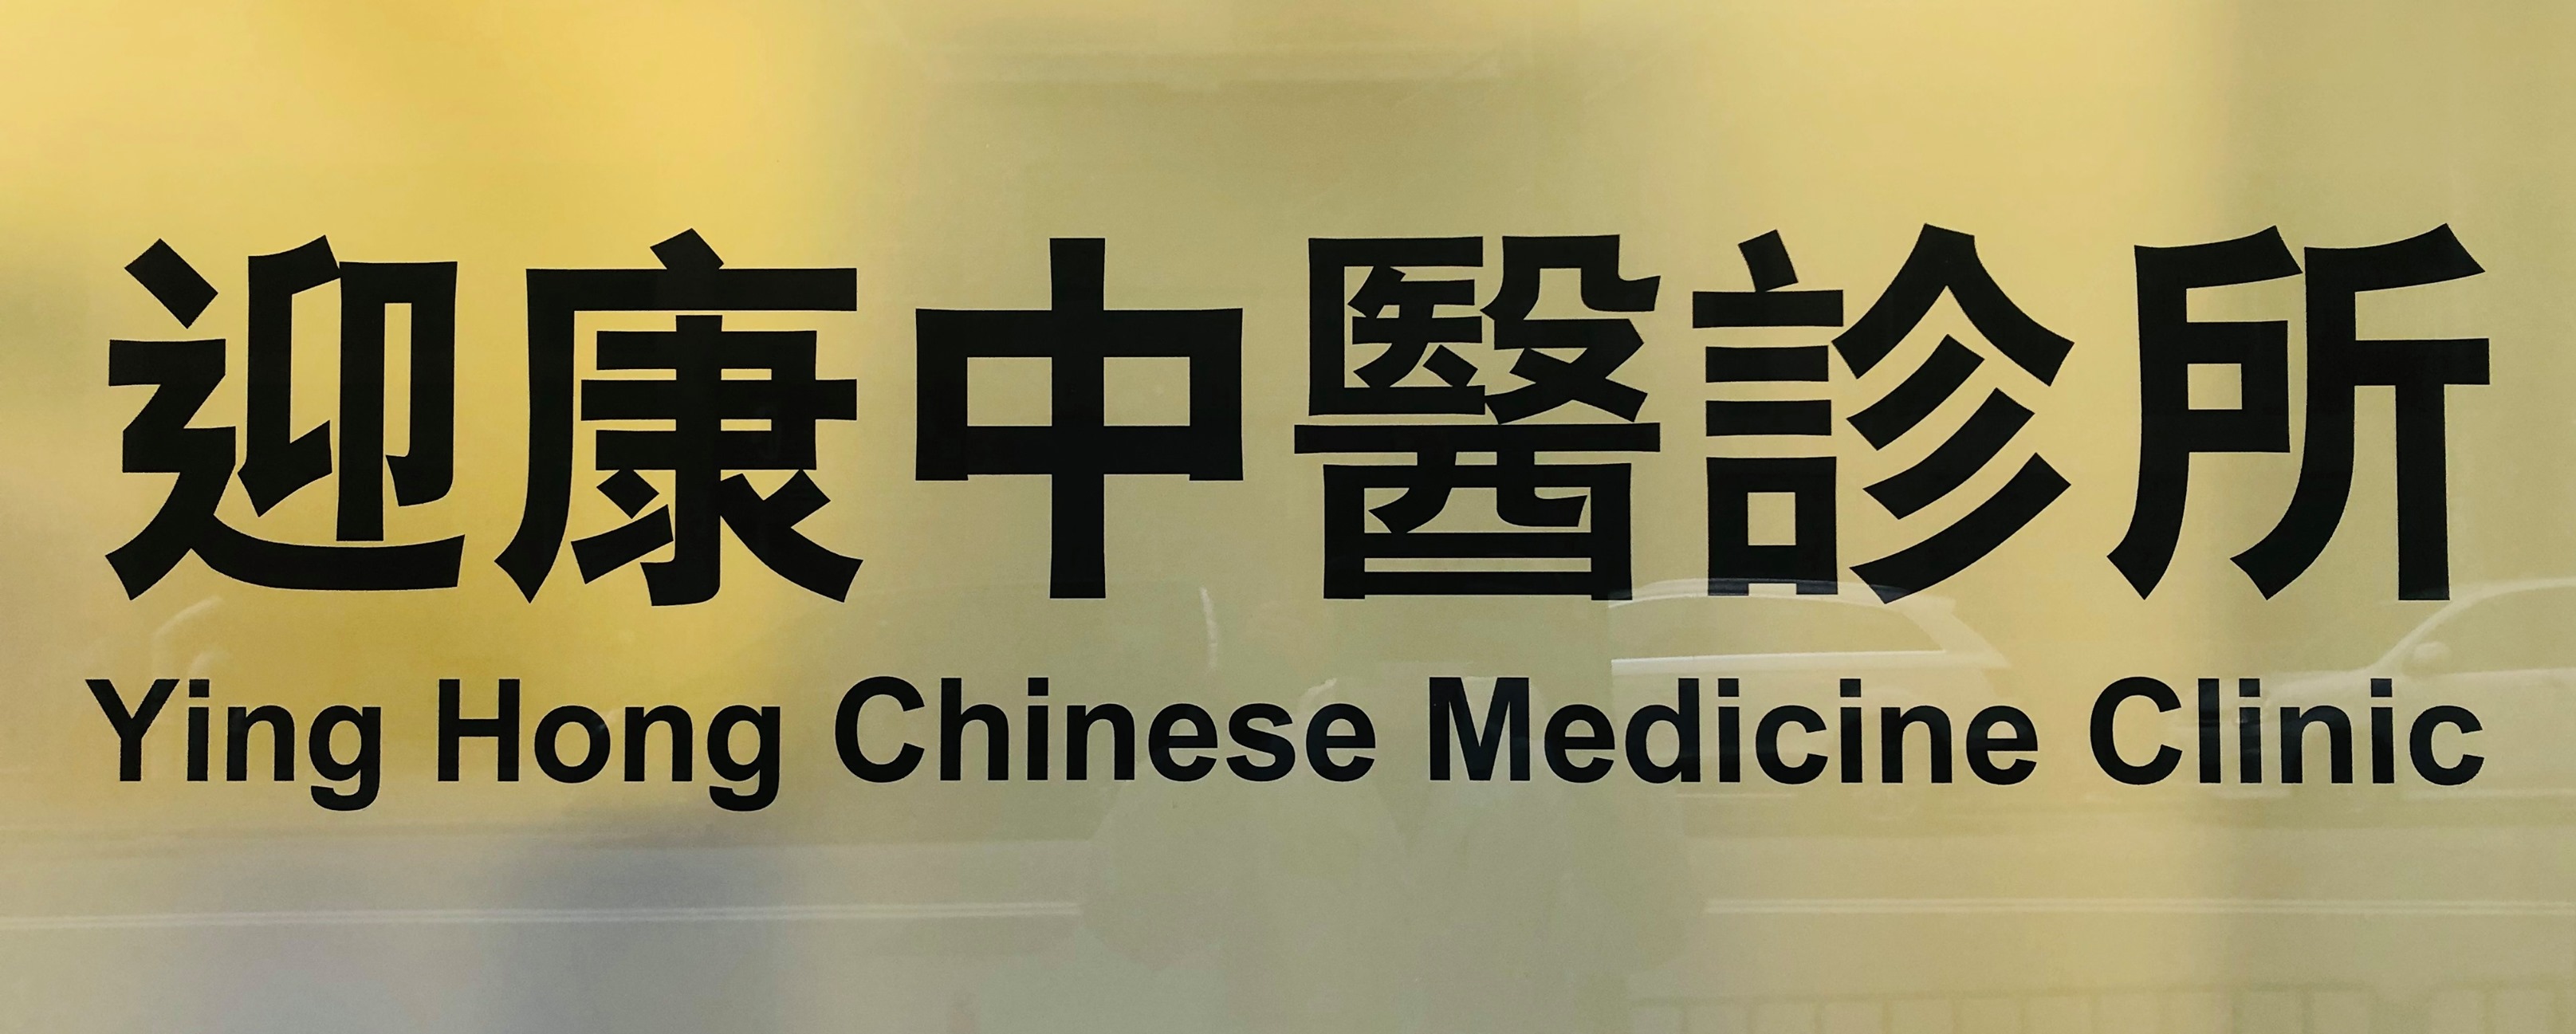 Chinese Medicine Practitioner: 嚴穎雯